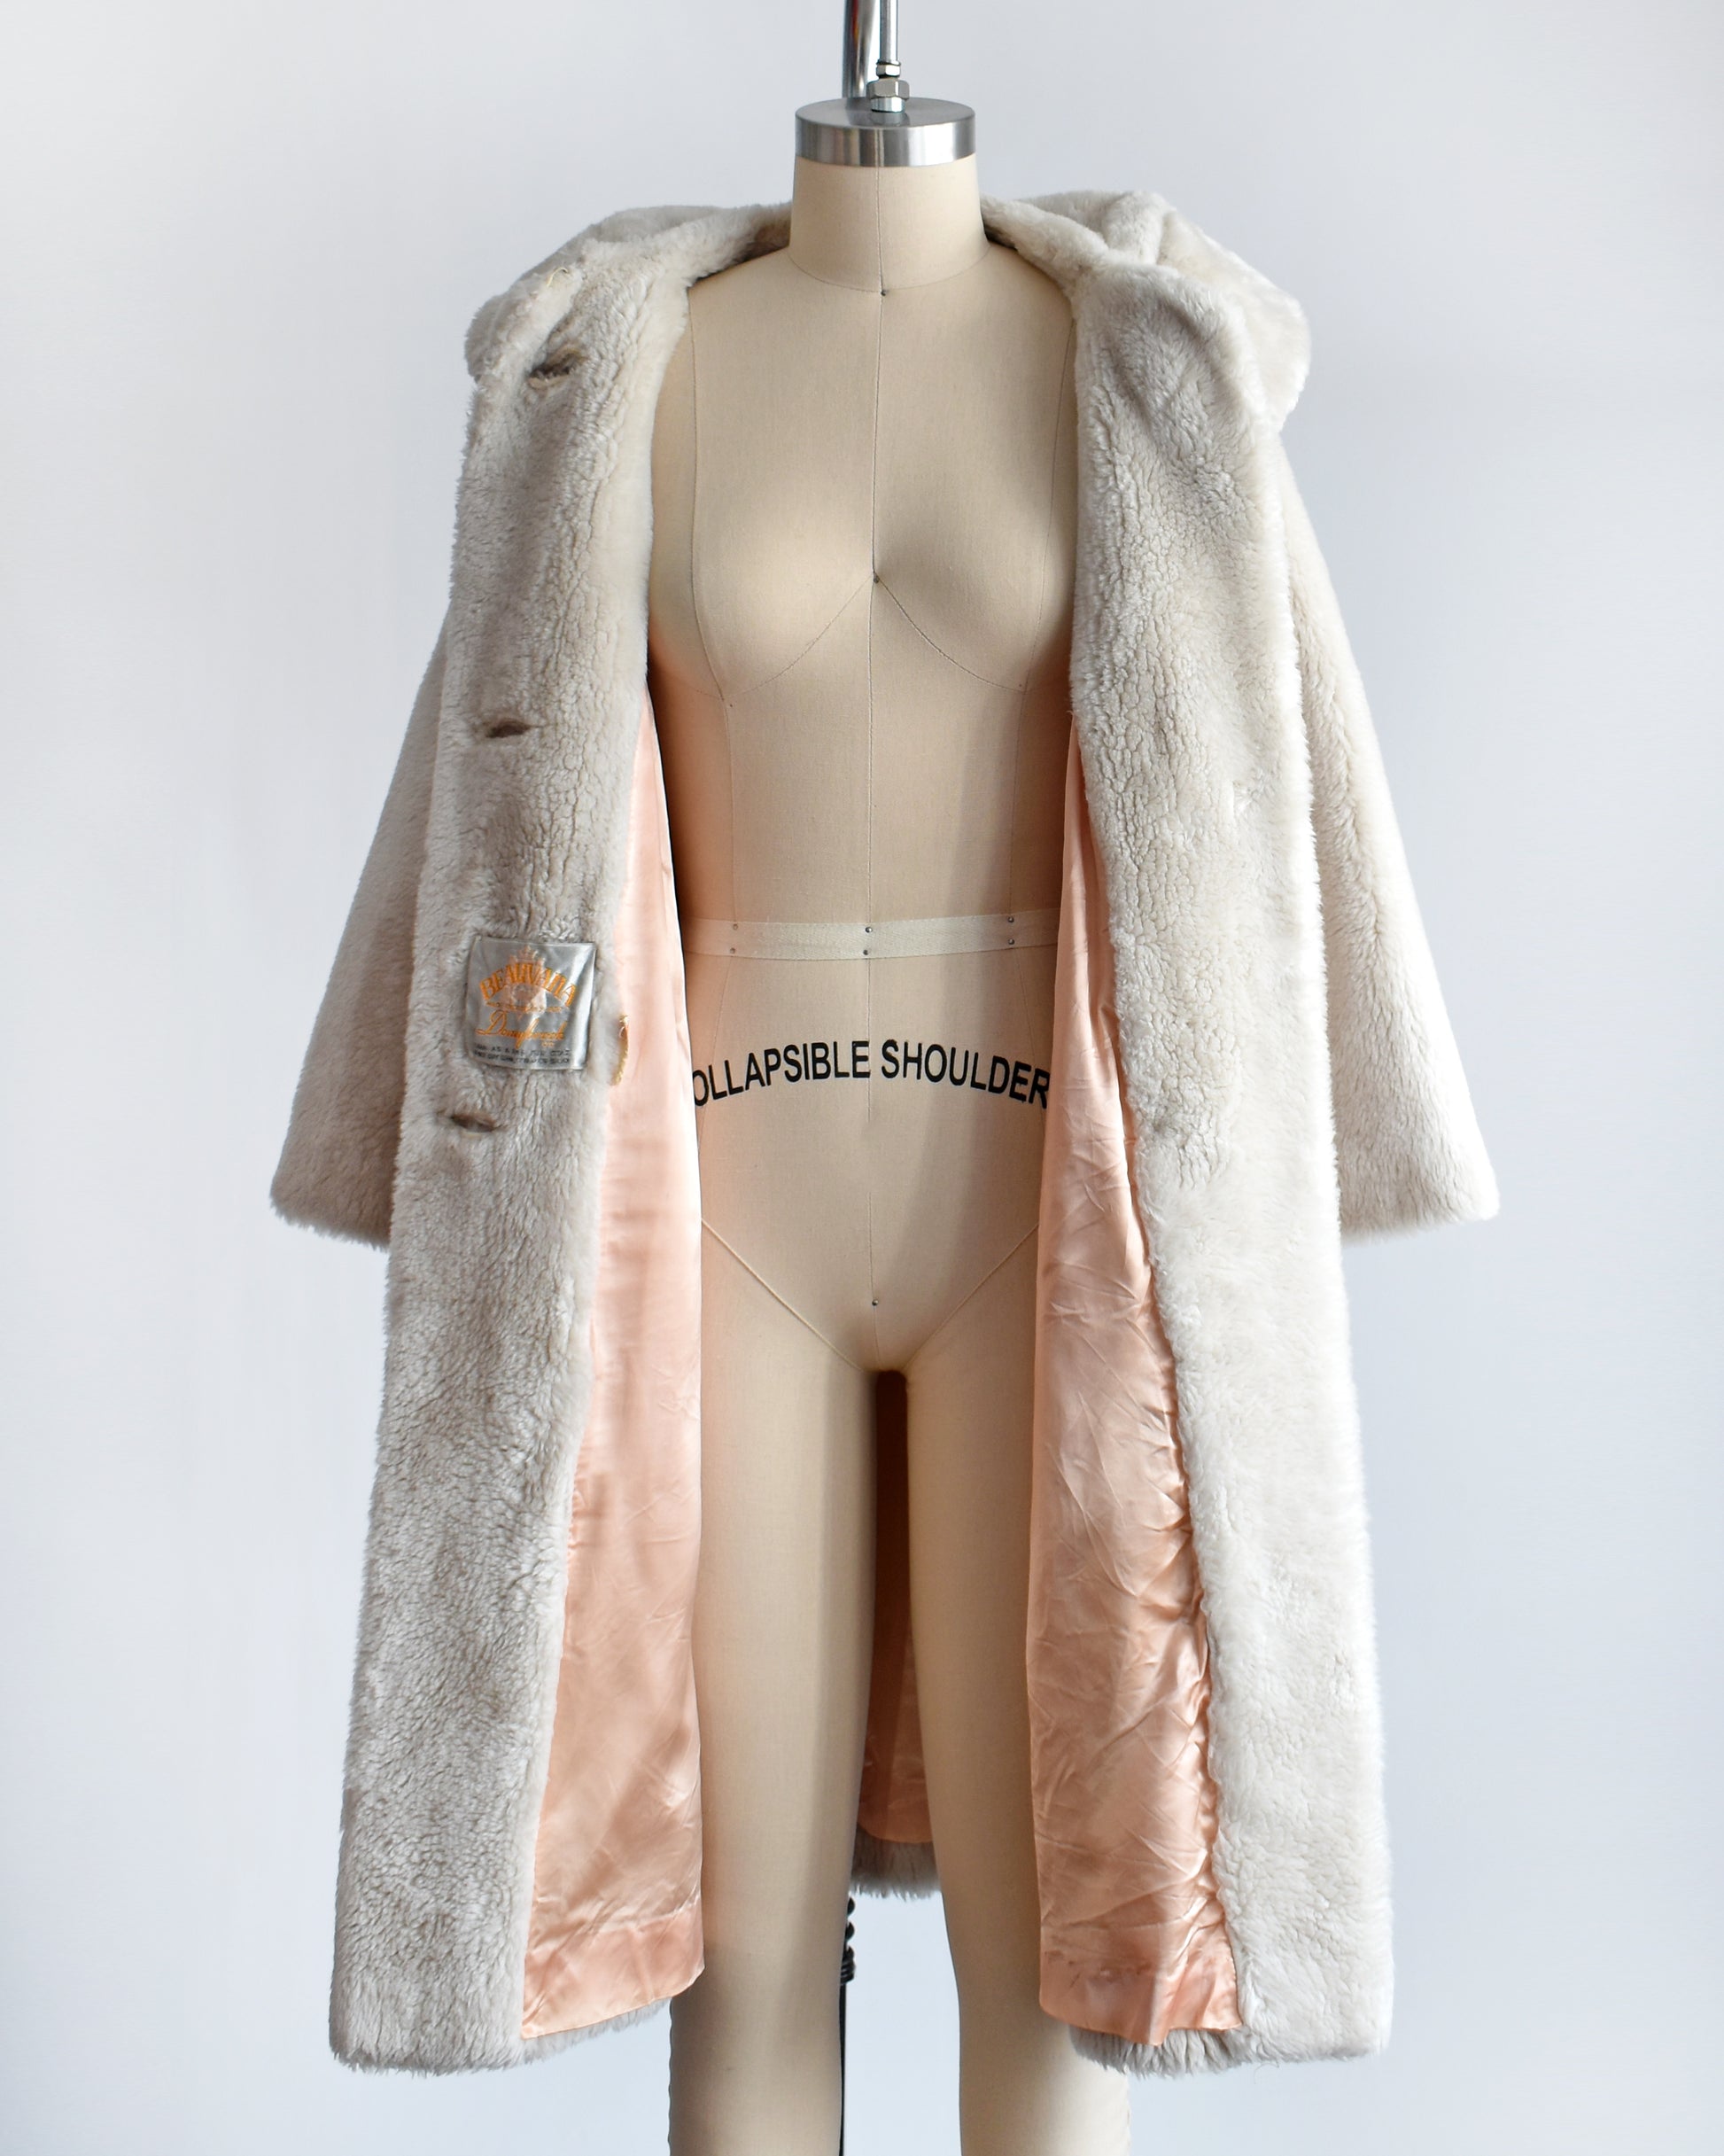 A vintage 1960s plush cream faux fur coat that features a Peter Pan style collar. The coat is open showing the peachy lining